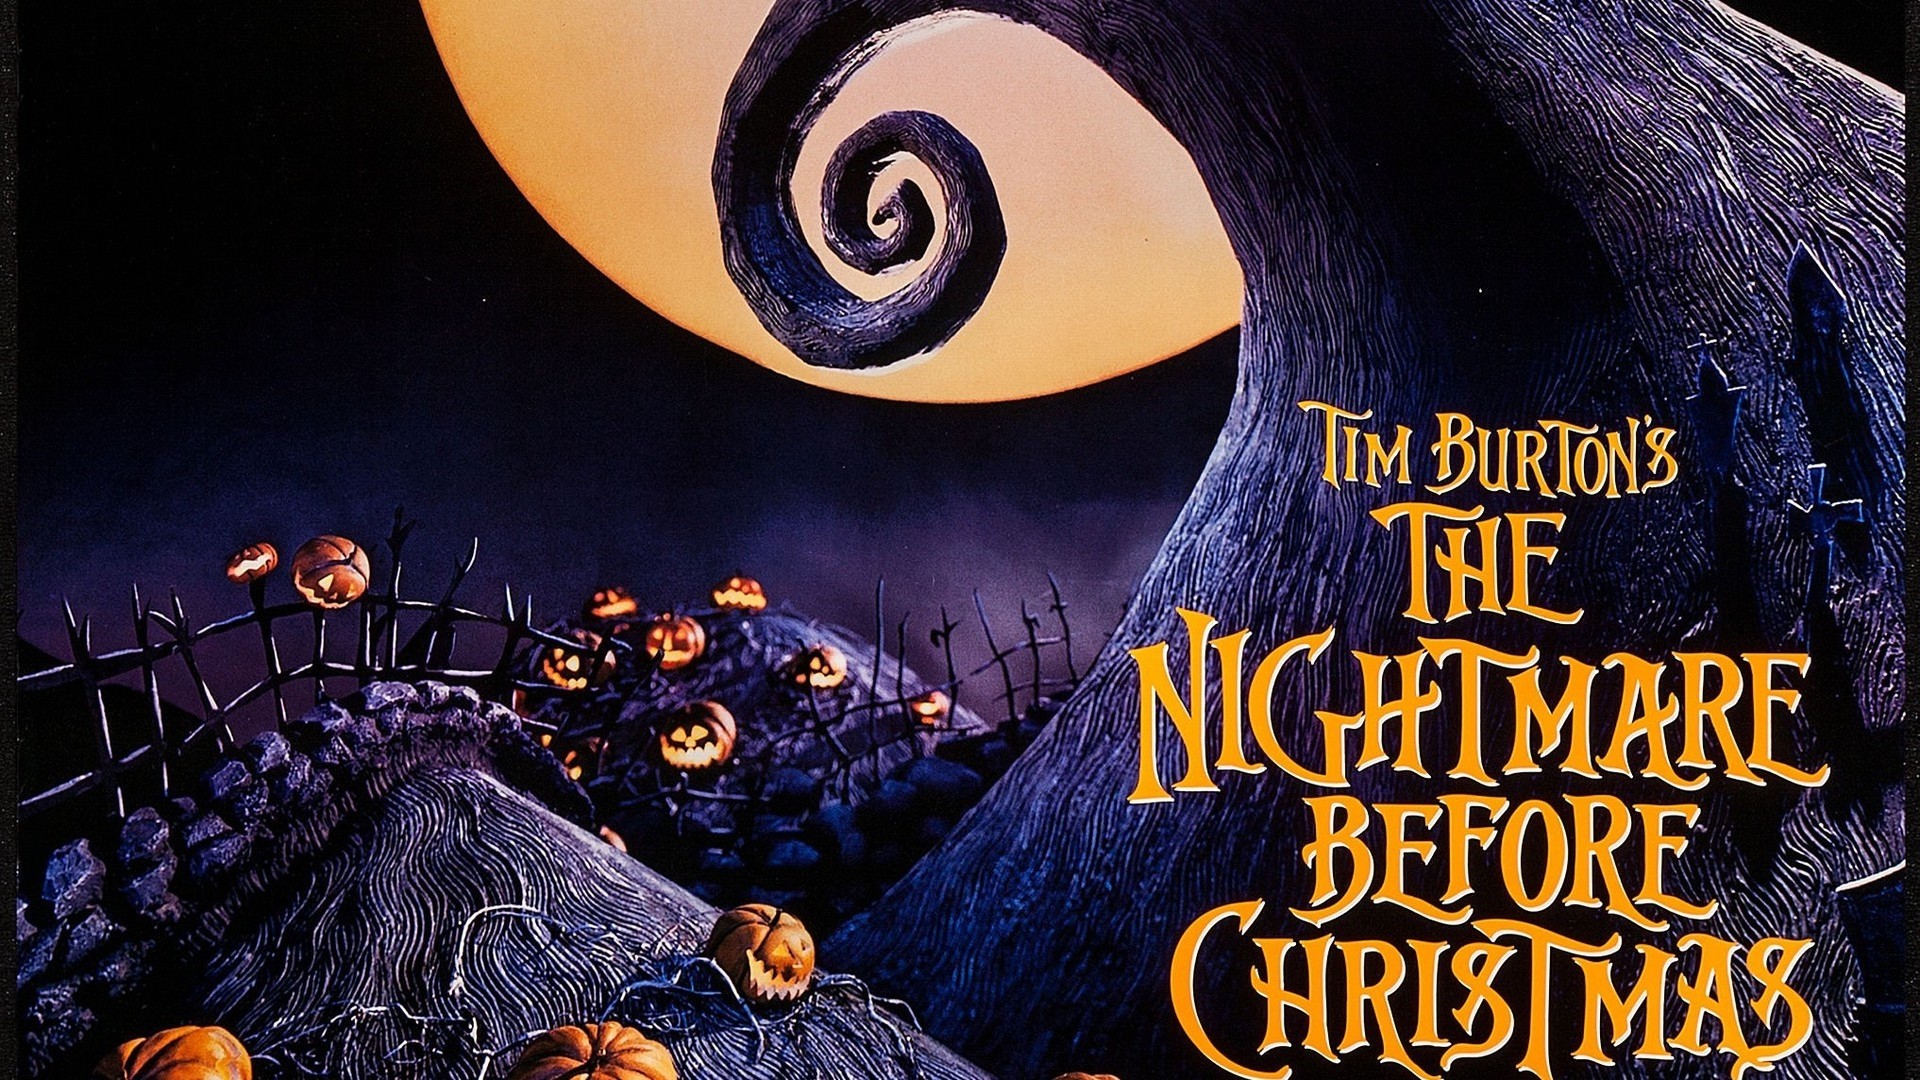 nightmare before christmas wallpaper,poster,font,space,graphic design,graphics